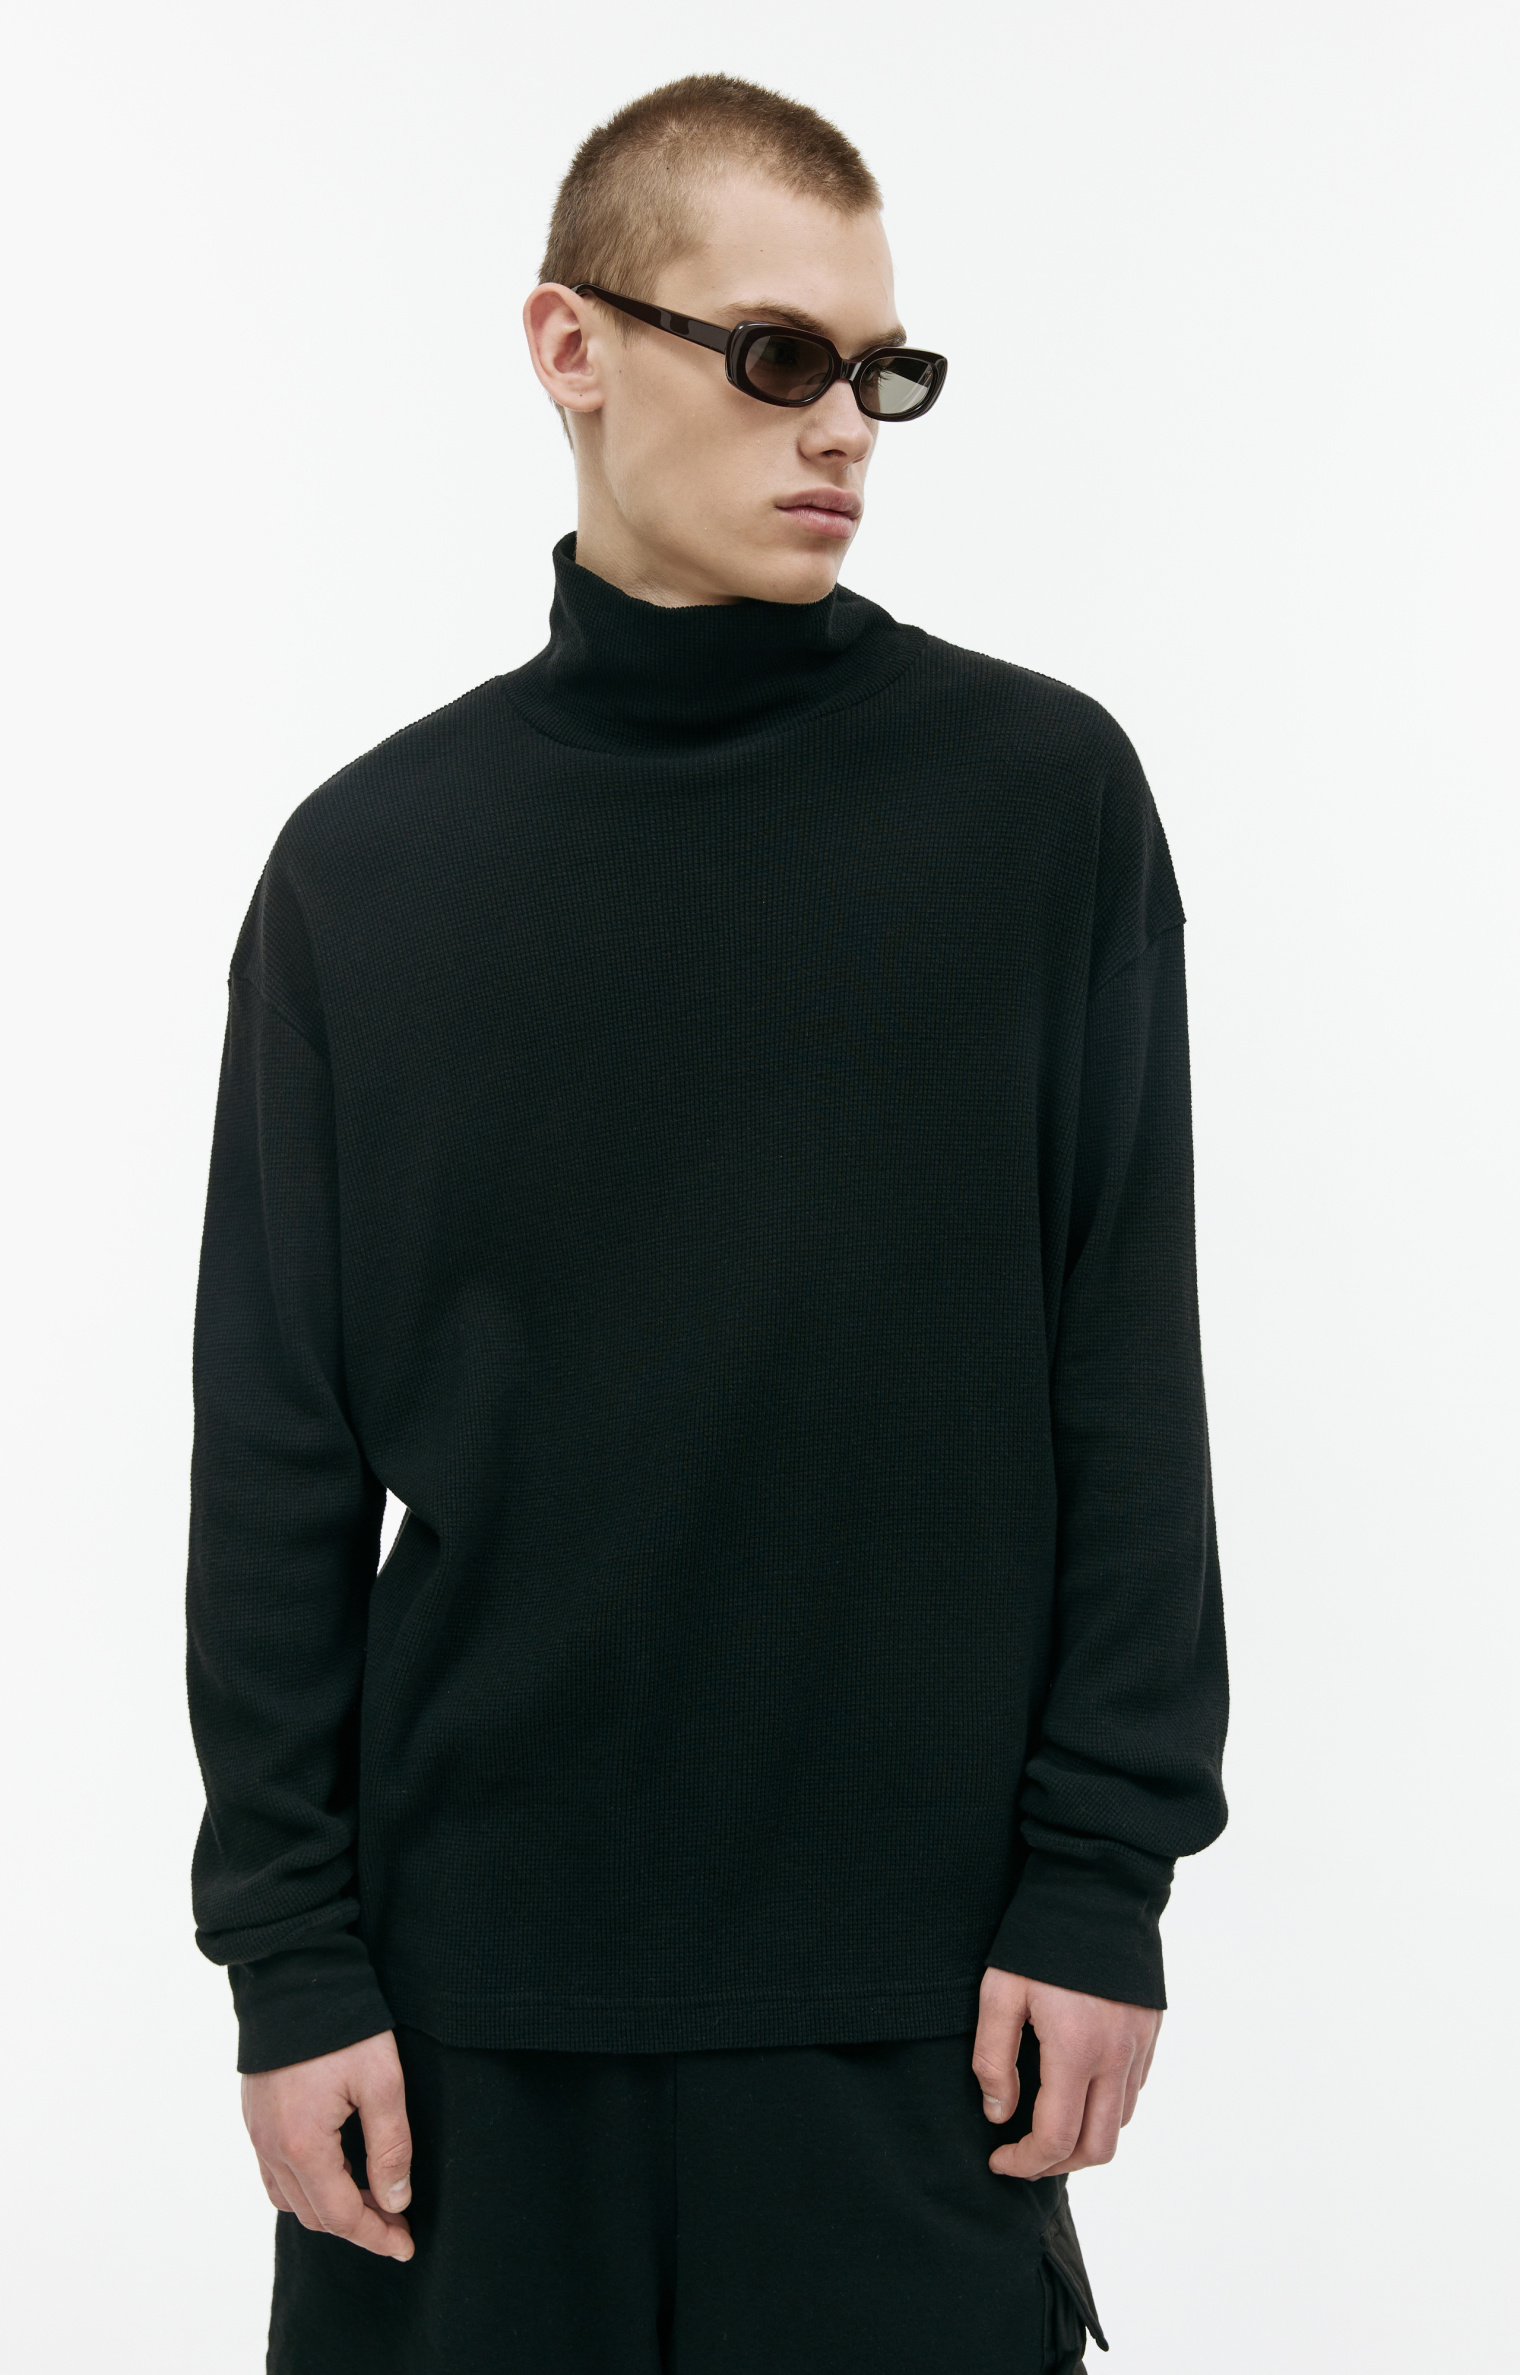 Undercover Waffle knit cotton turtleneck